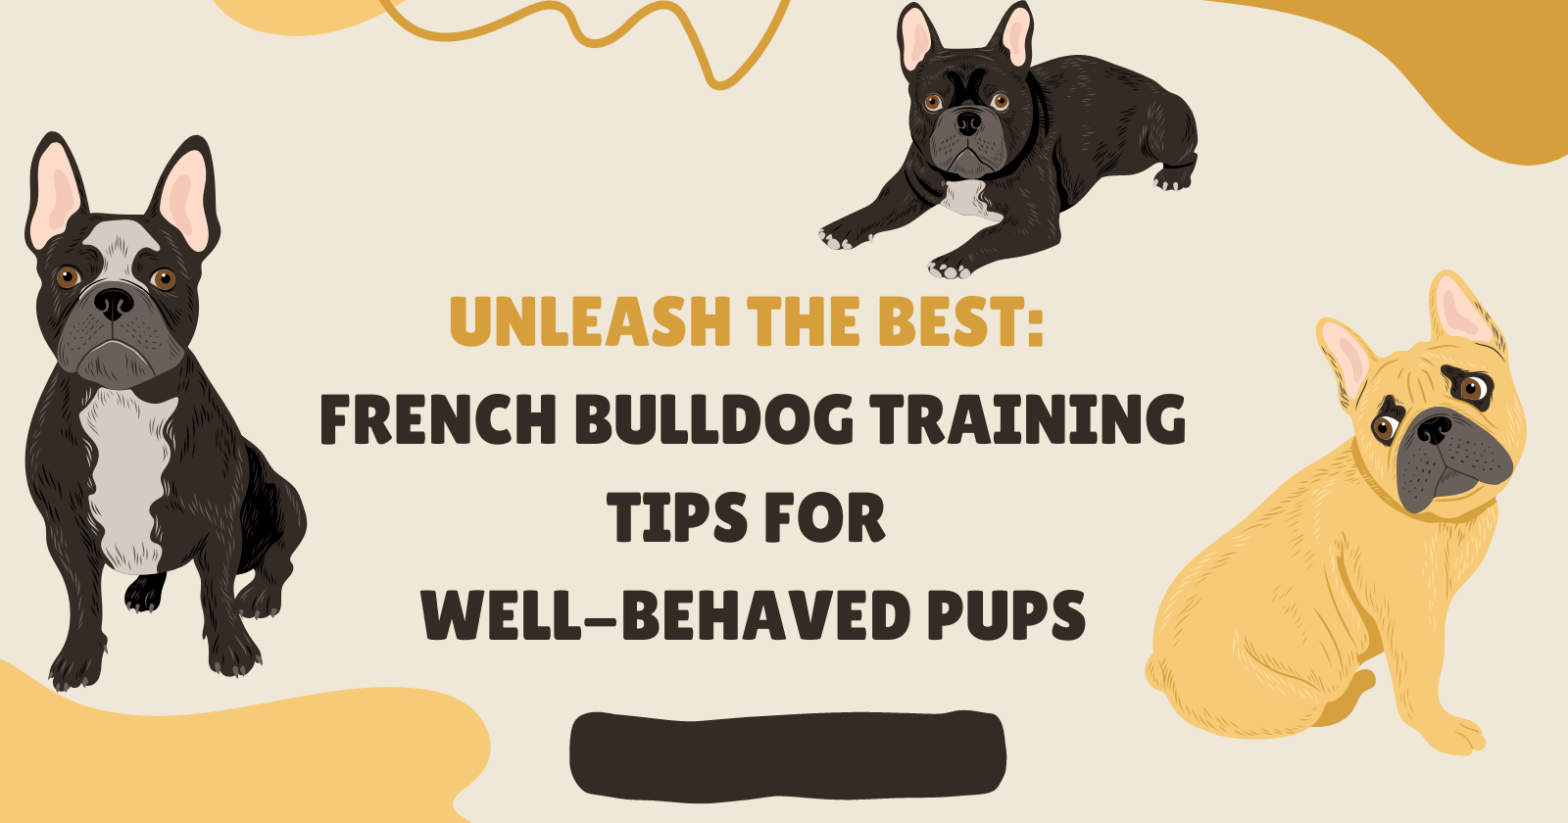 Discover the Top Foods: What Can French Bulldogs Eat